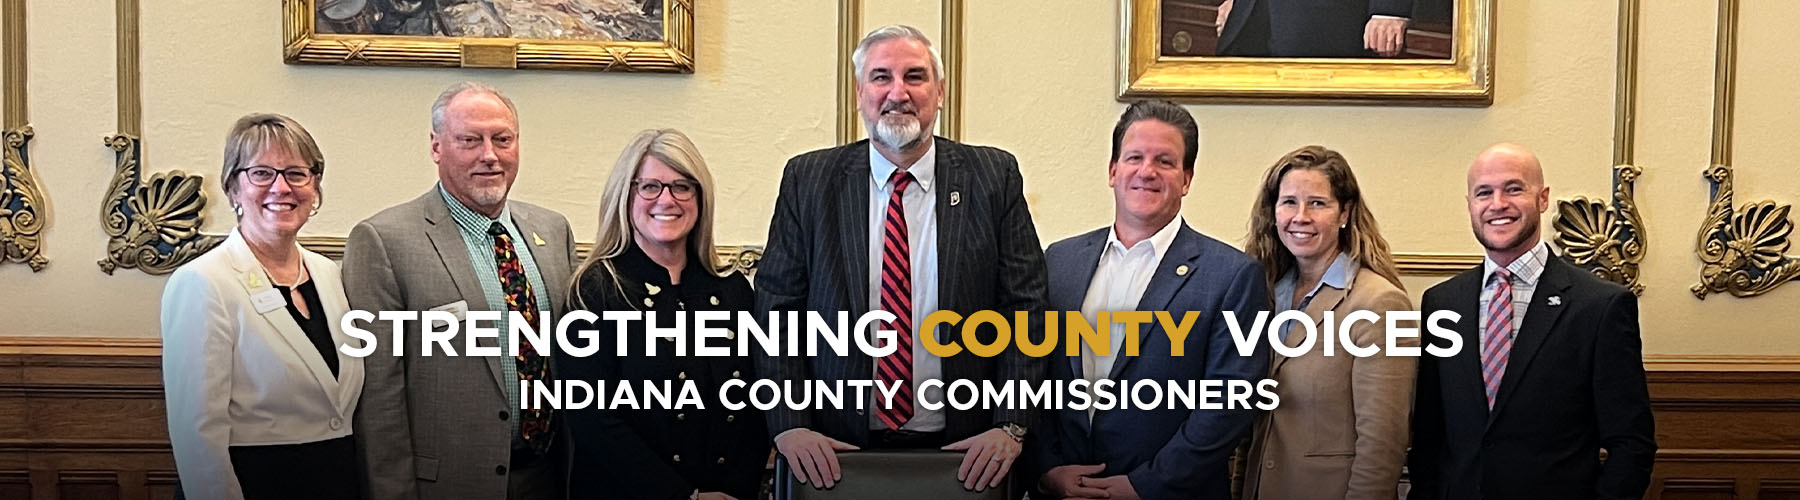 Indiana County Commissioners Strengthening County Voices